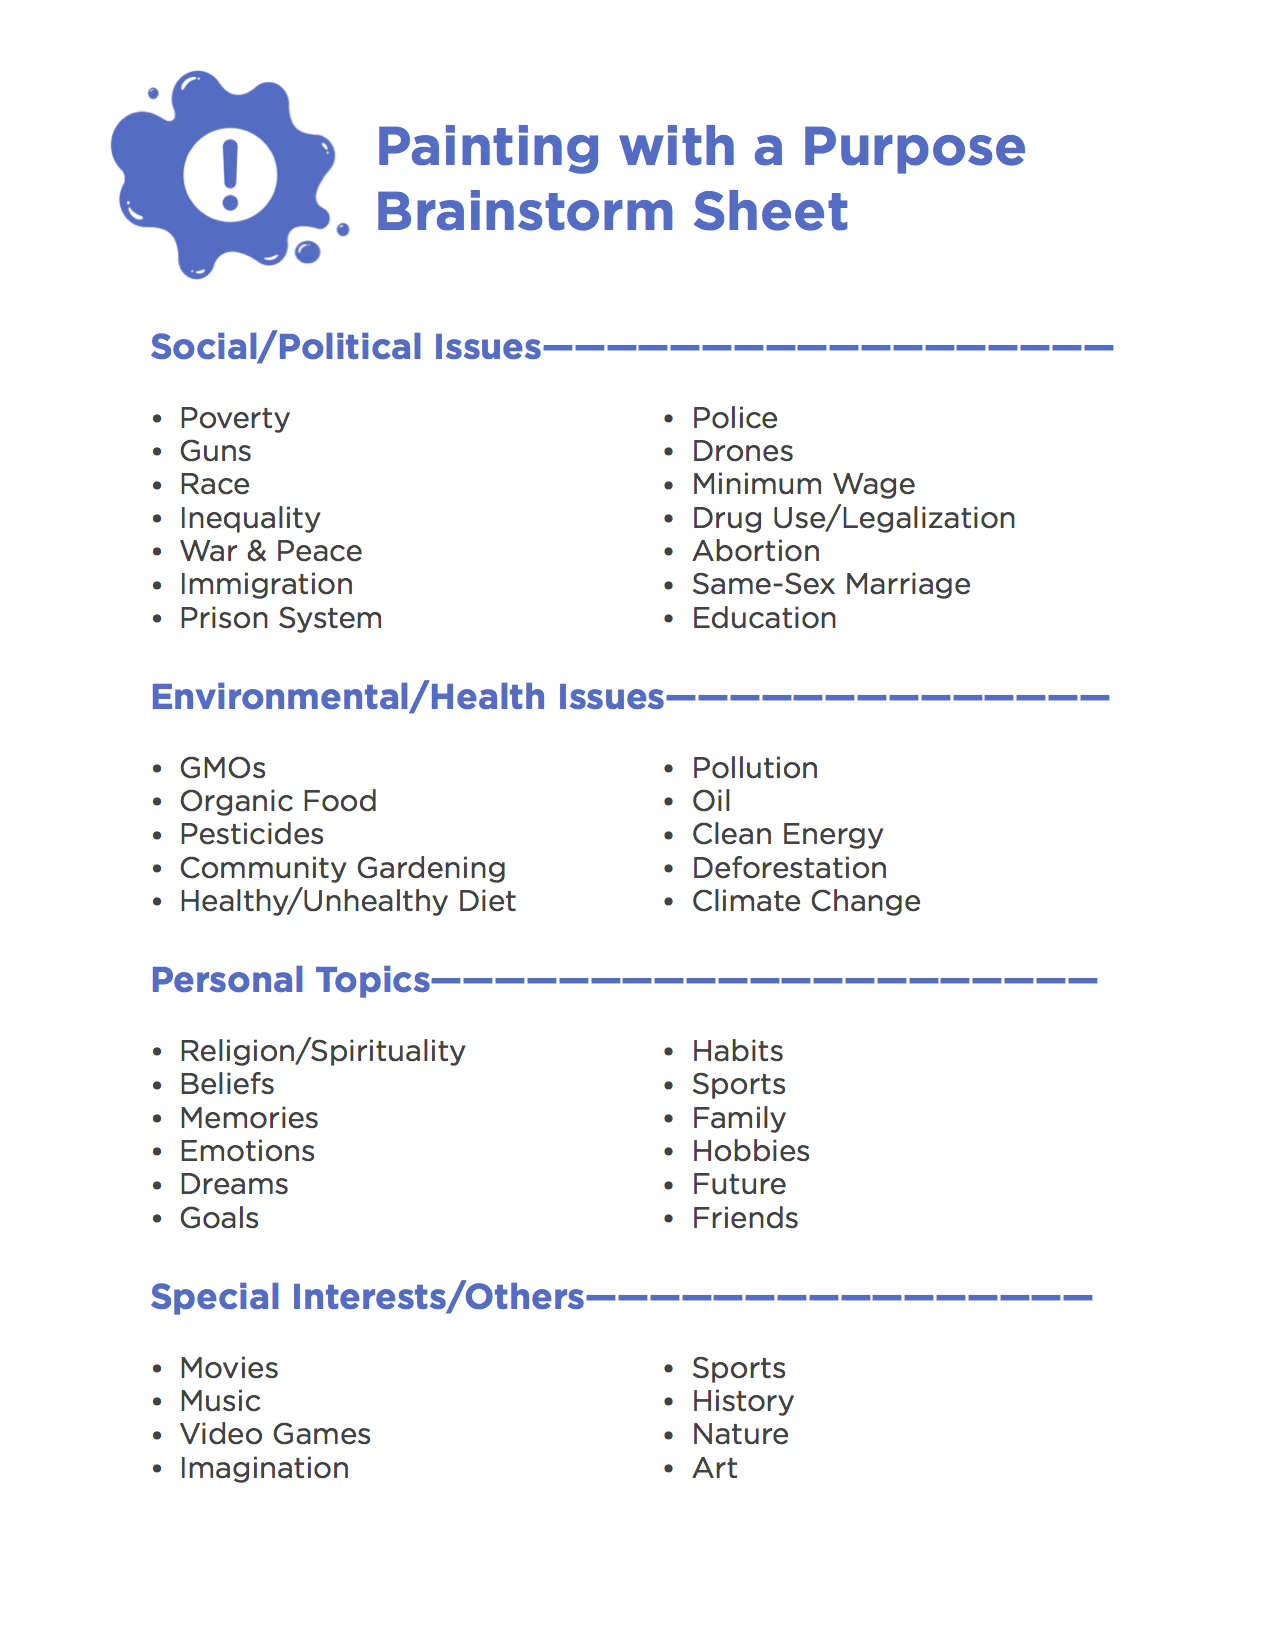 Painting with a Purpose Brainstorm Sheet